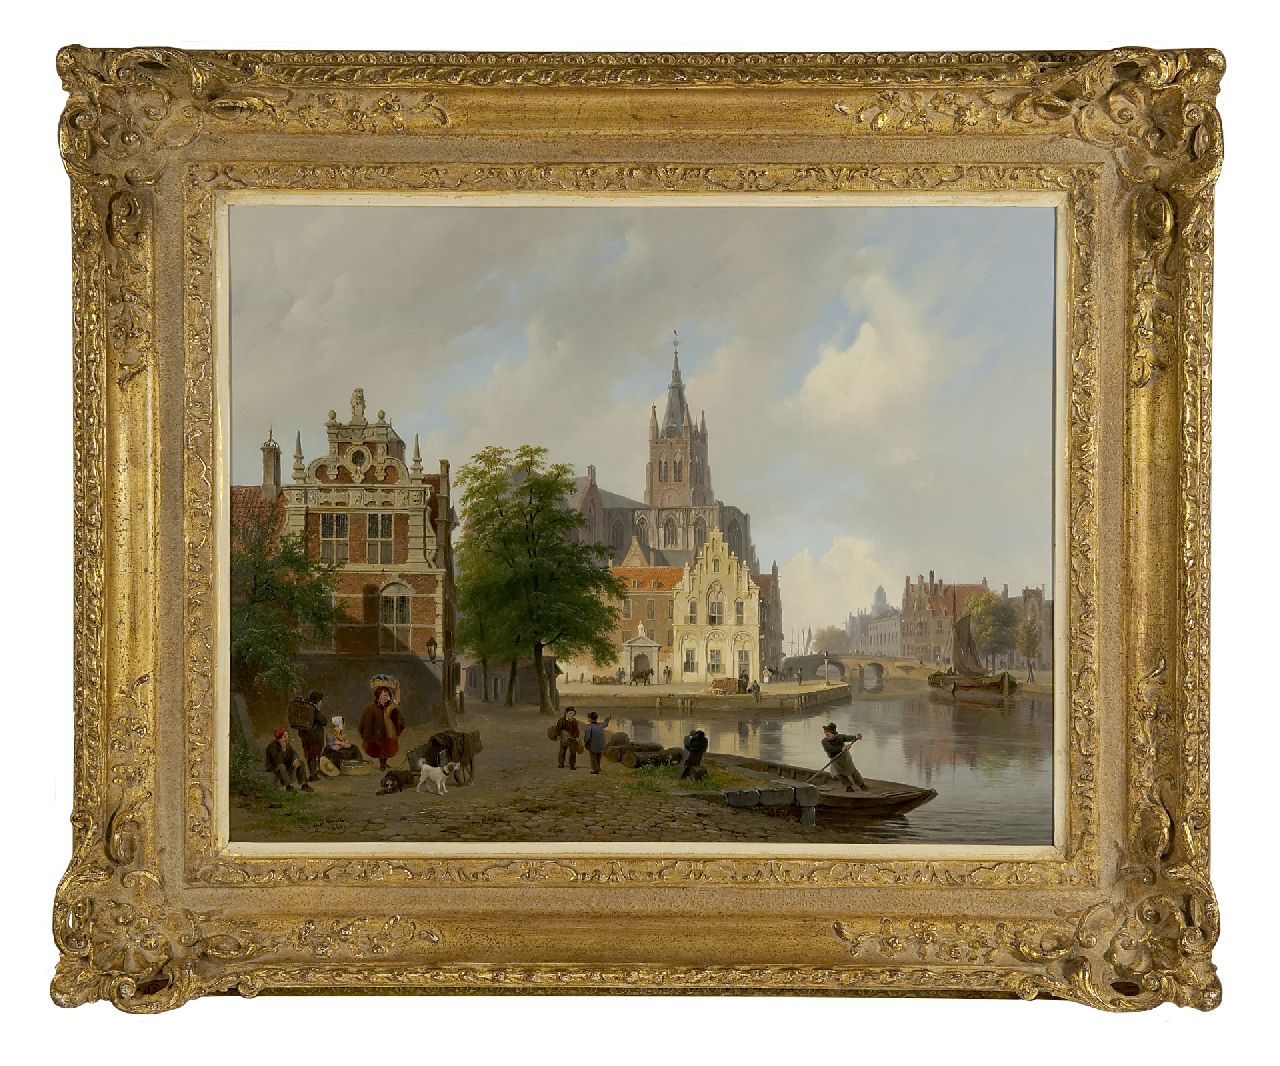 Hove B.J. van | Bartholomeus Johannes 'Bart' van Hove | Paintings offered for sale | A view of the Oude Kerk in Delft, oil on panel 42.4 x 54.9 cm, signed l.l. and dated 1841